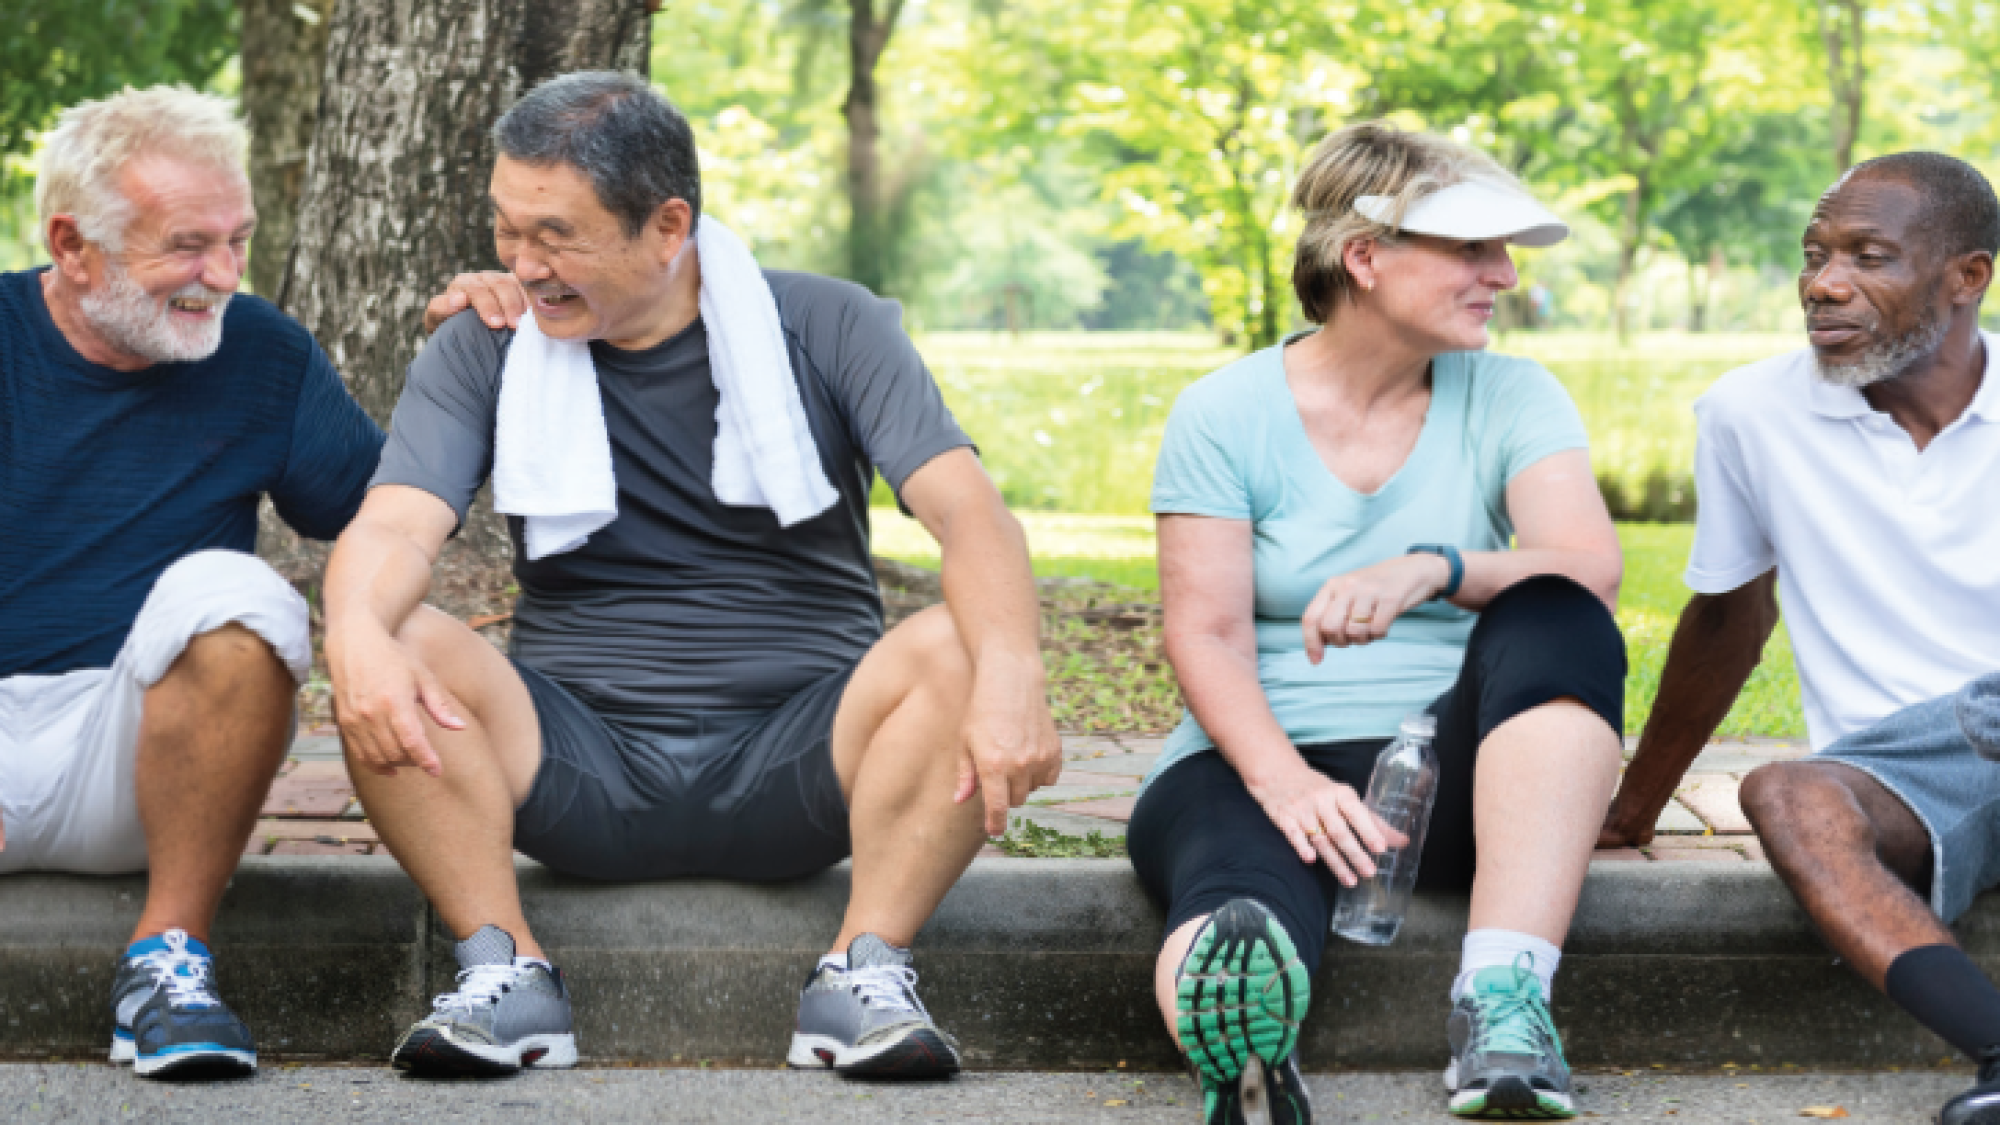 Four aging mid-life Americans sit on curb in their workout clothes